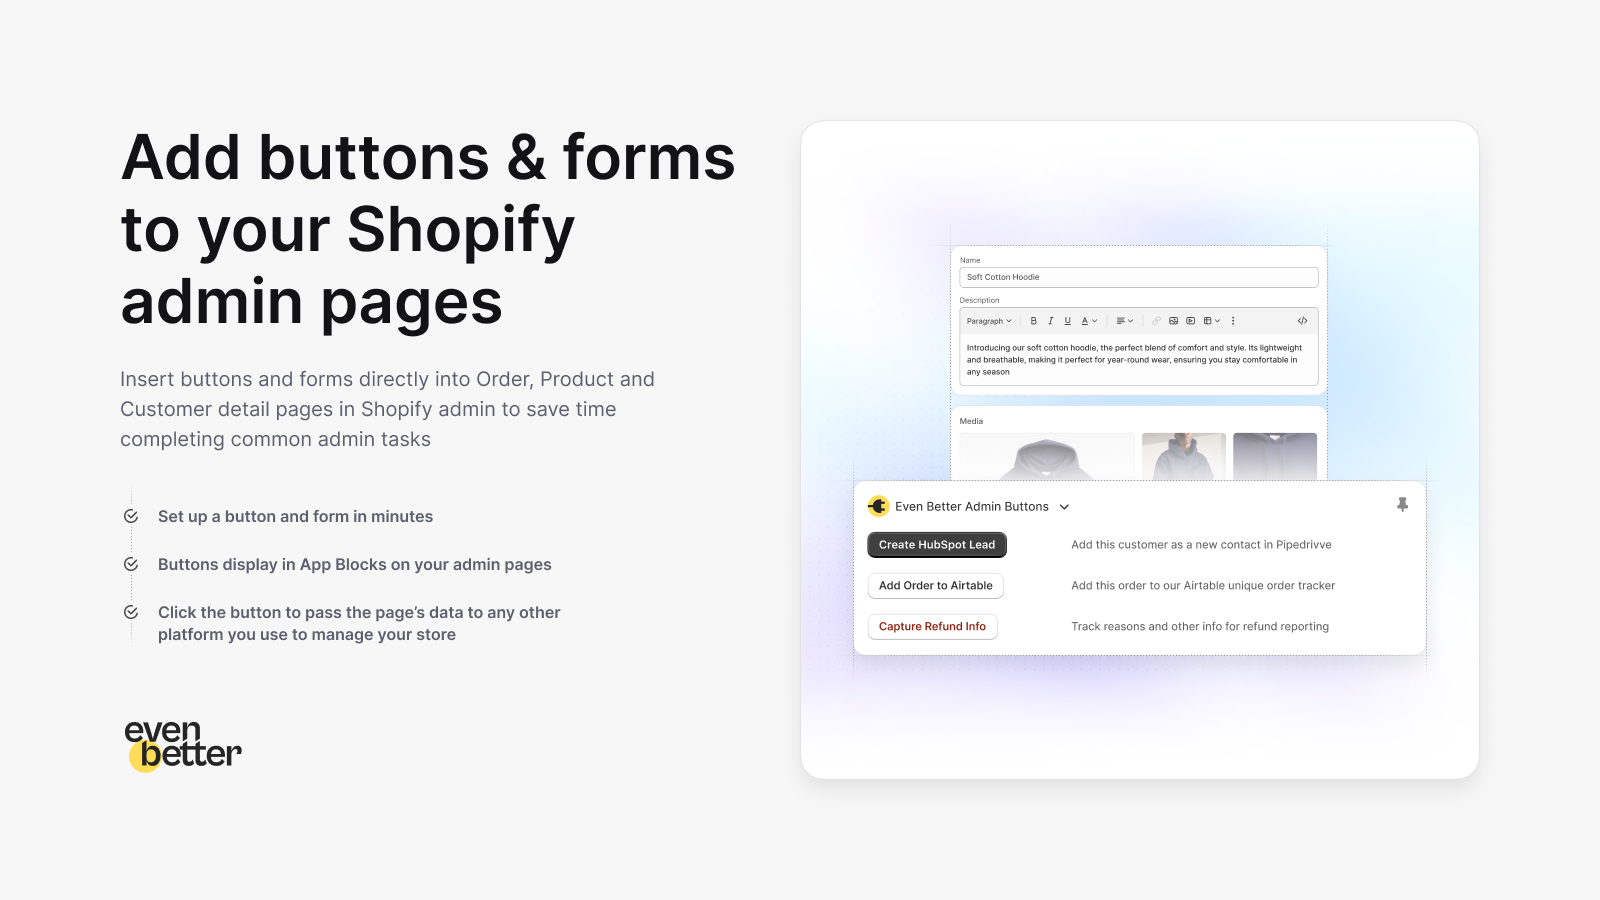 Add buttons & forms to order, product and customer pages